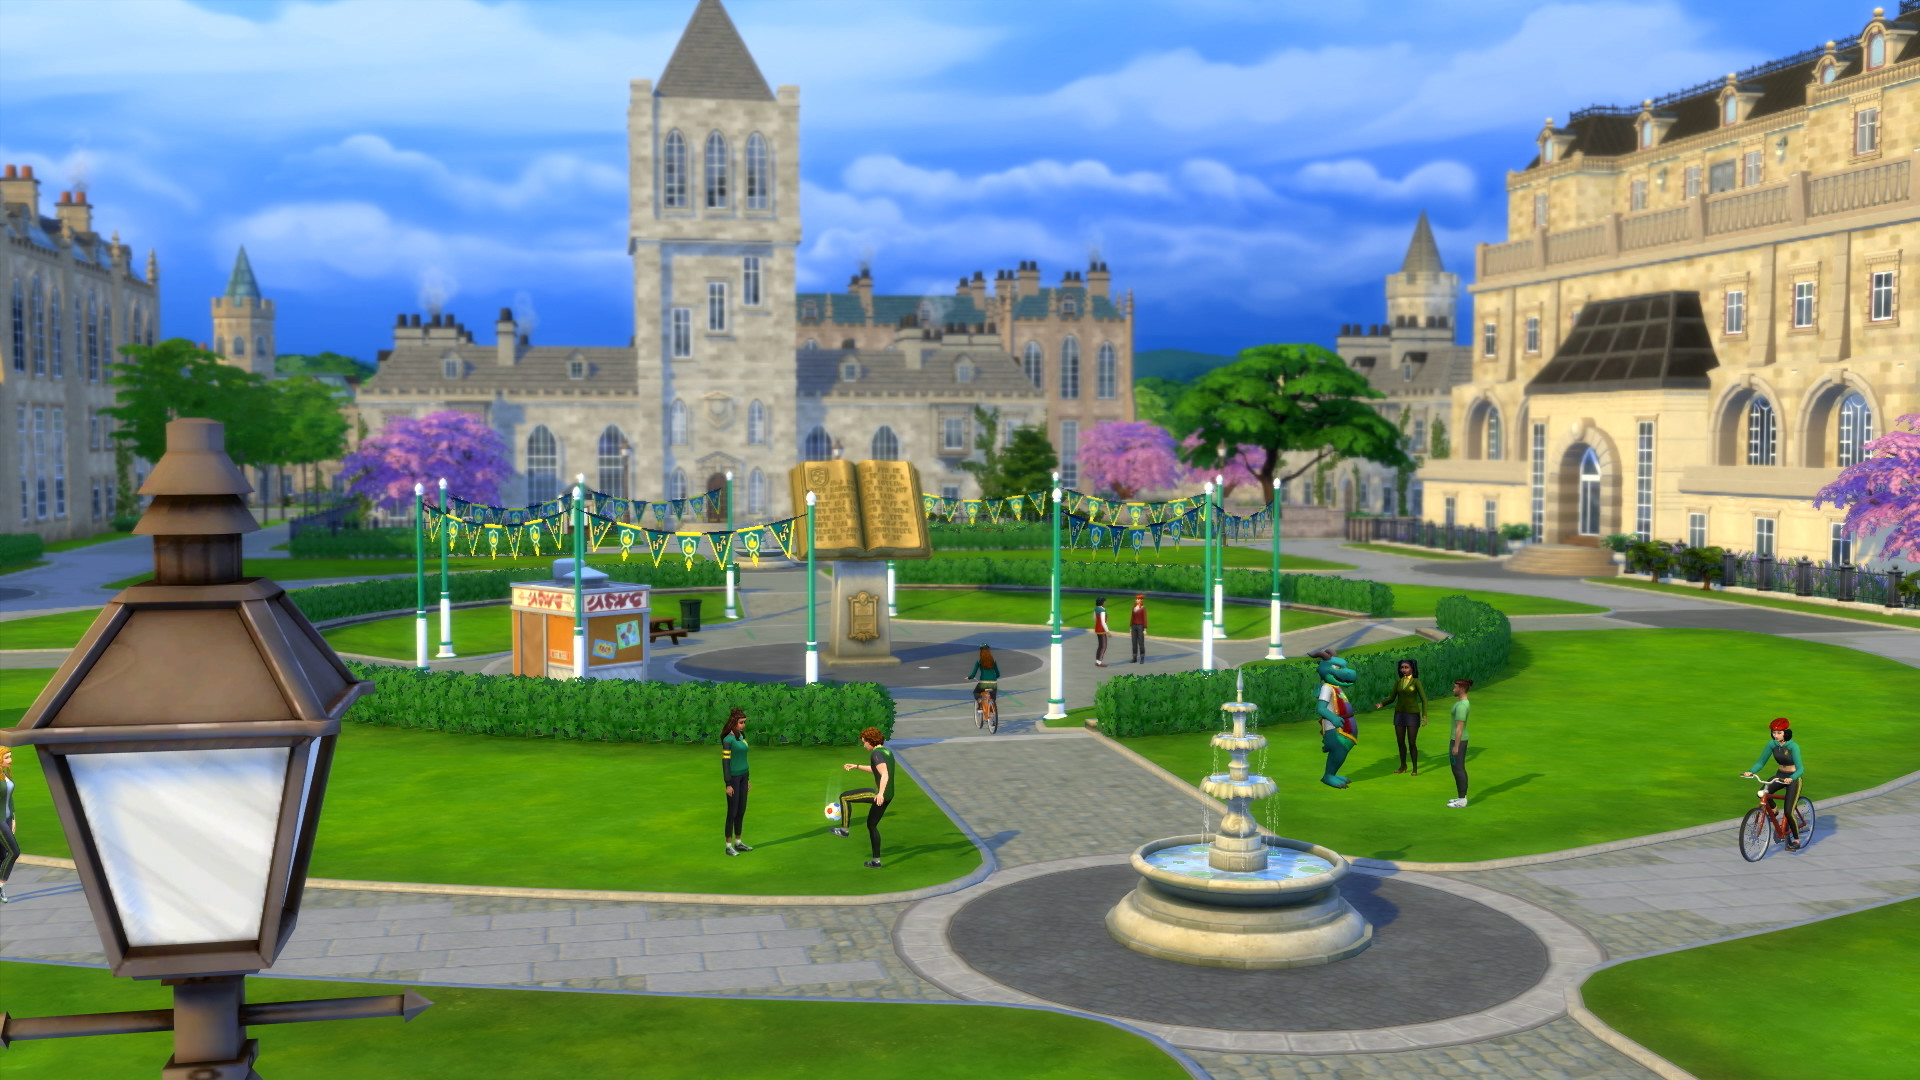 The Sims 4 Discover University Free Full Download CODEX PC Games